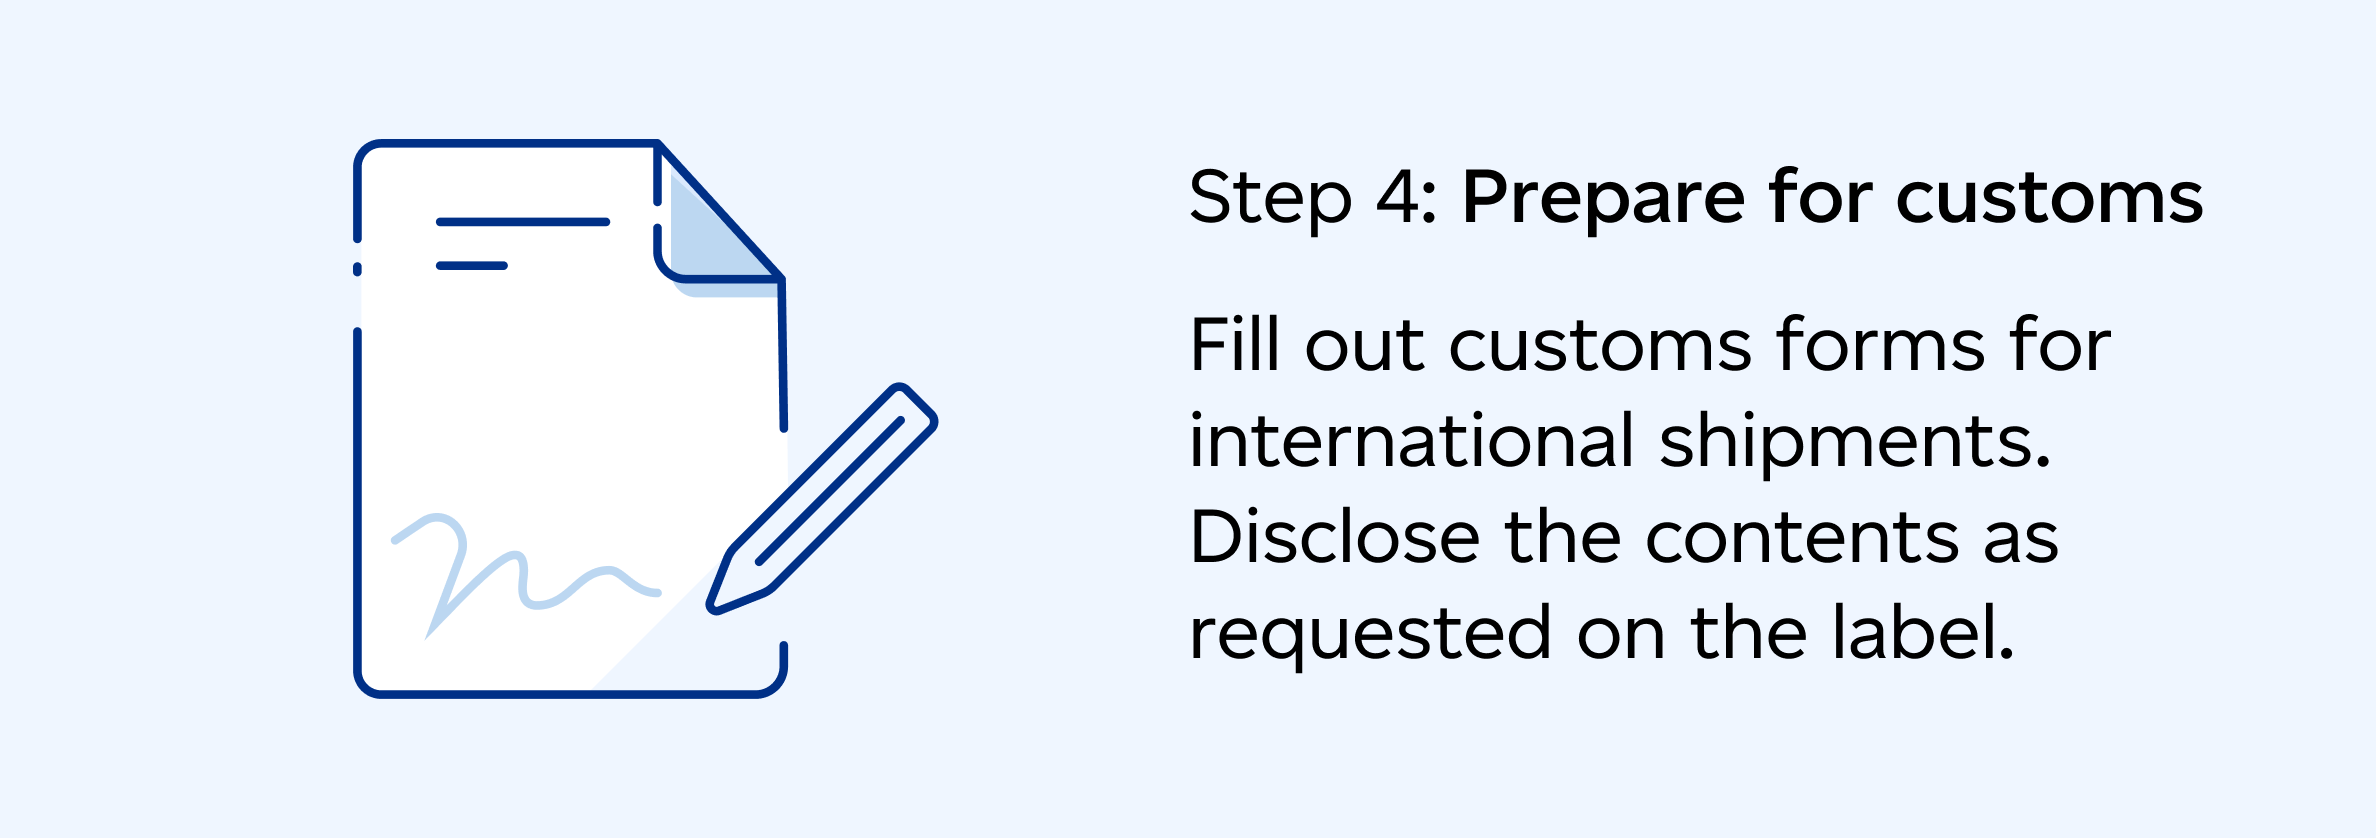 Step 4: Prepare for customs: Fill out customs forms for international shipments. Disclose the contents as requested on the label.